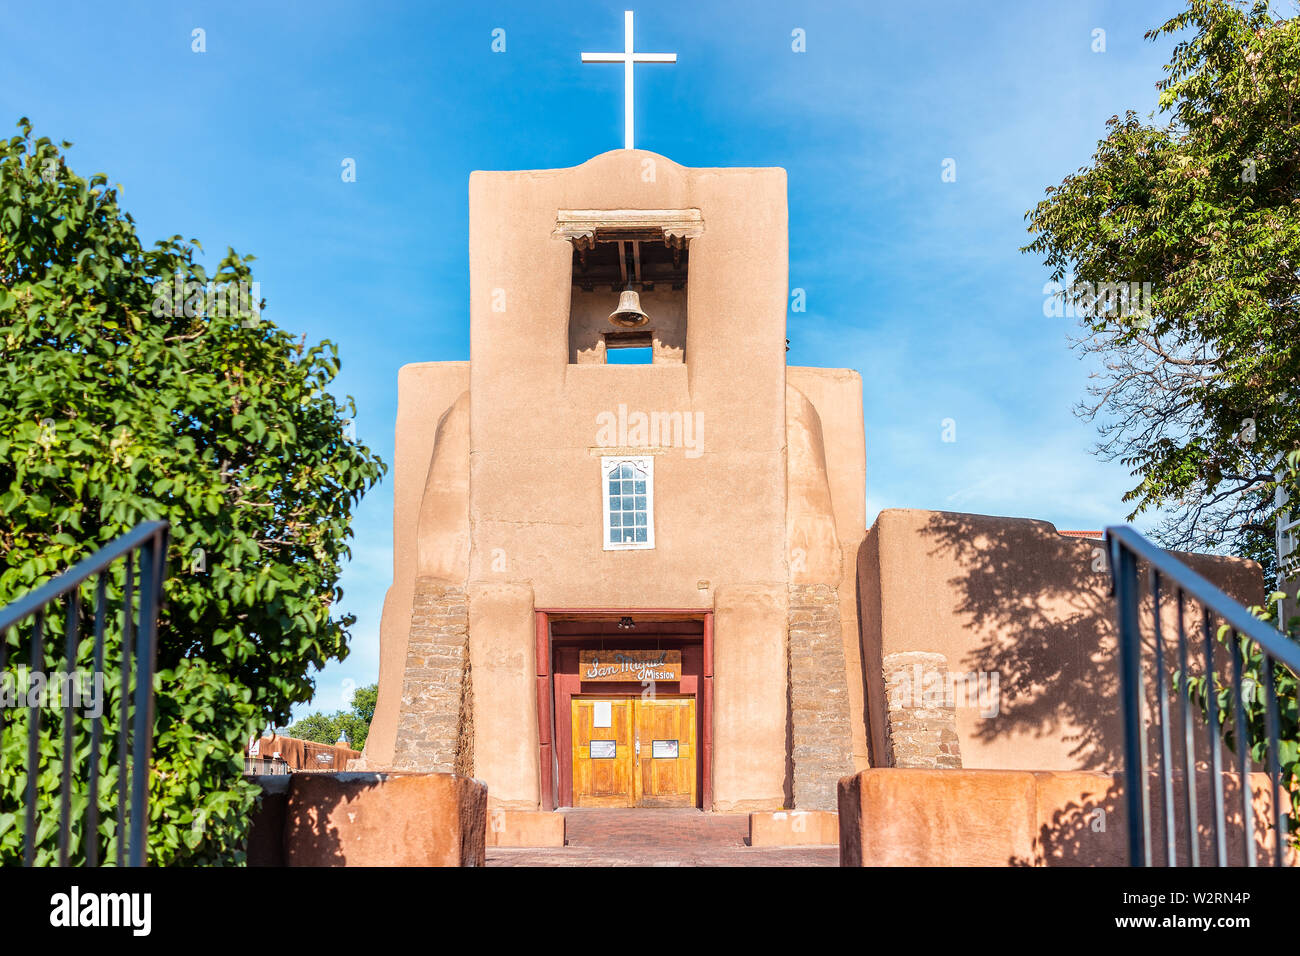 Santa Fe, USA - June 14, 2019: San Miguel Mission chapel oldest church in the United States with adobe pueblan style architecture, blue cross and blue Stock Photo